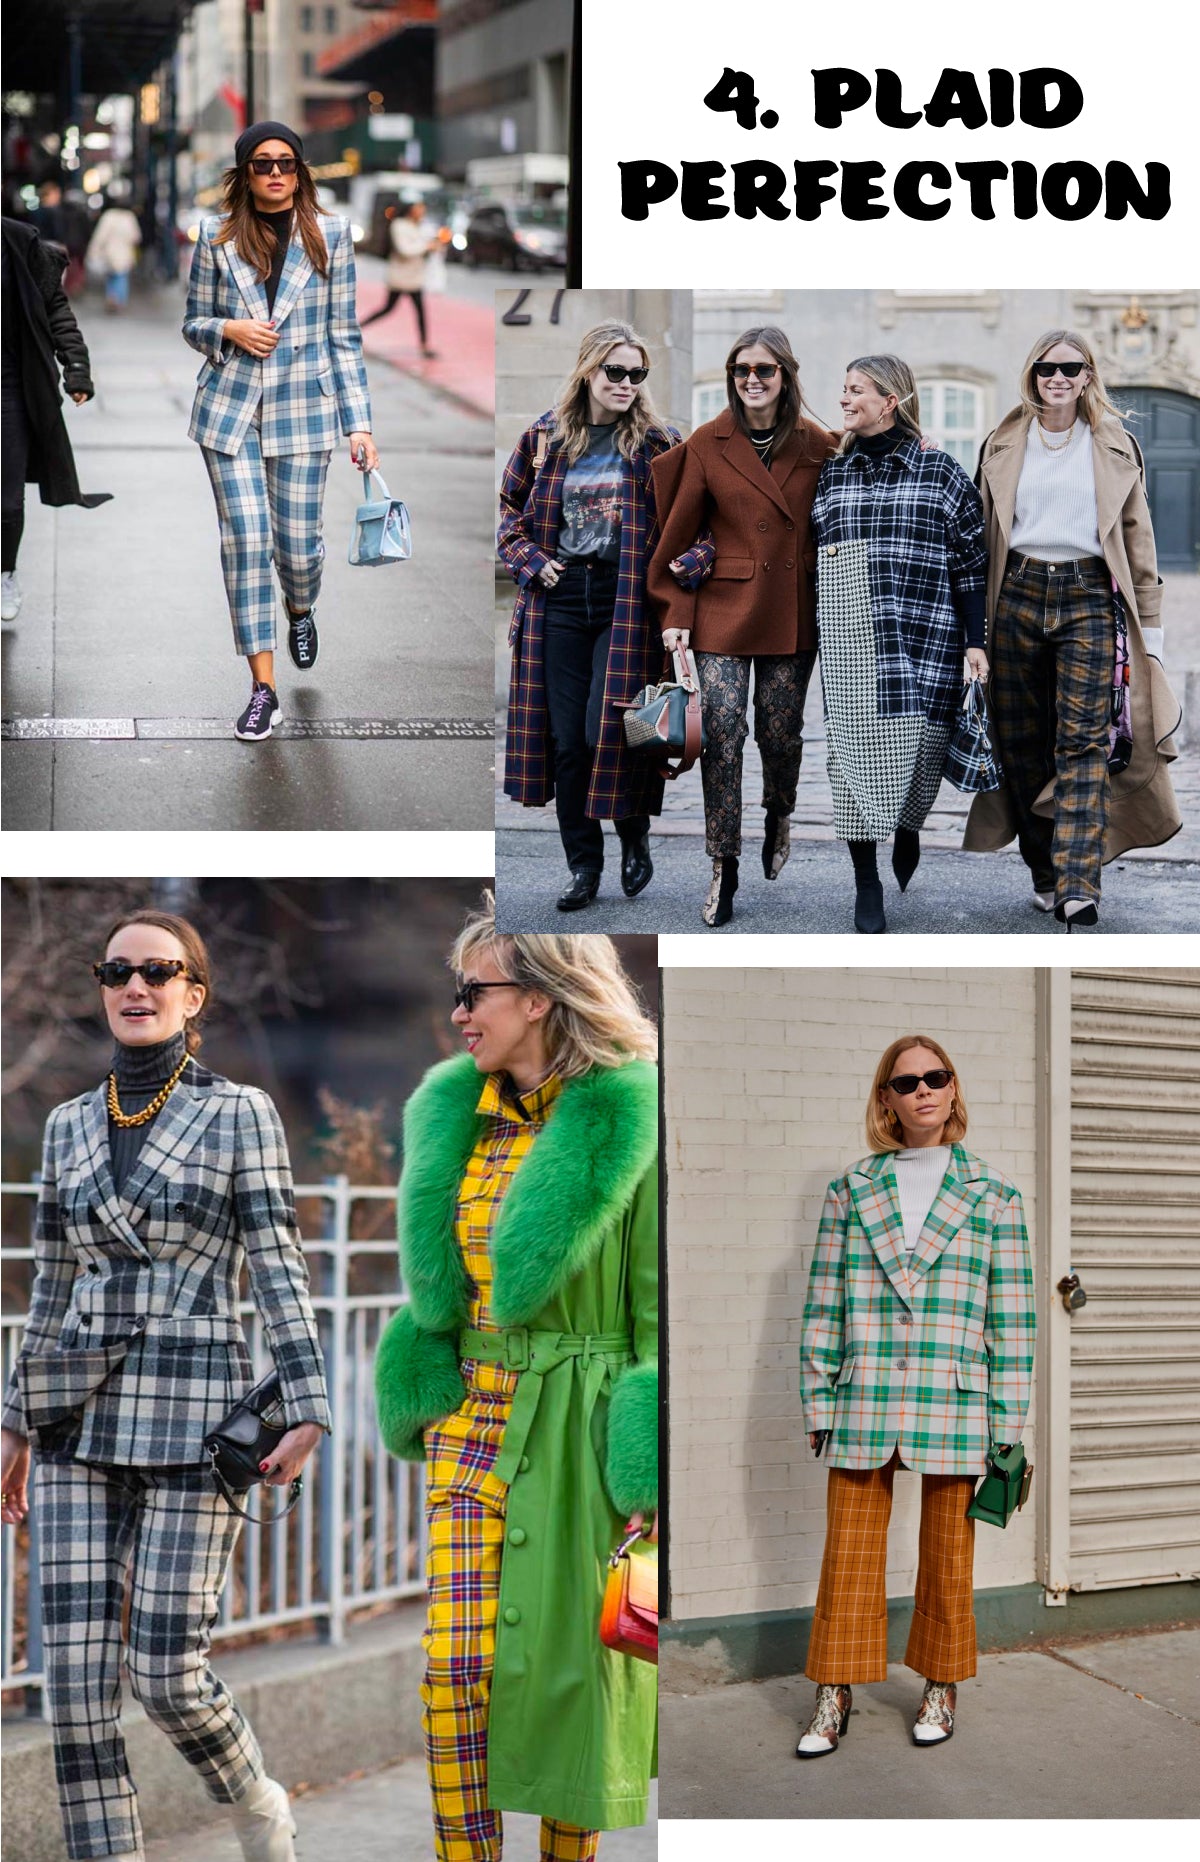 Plaid Perfection NYFW Trend Report 2019